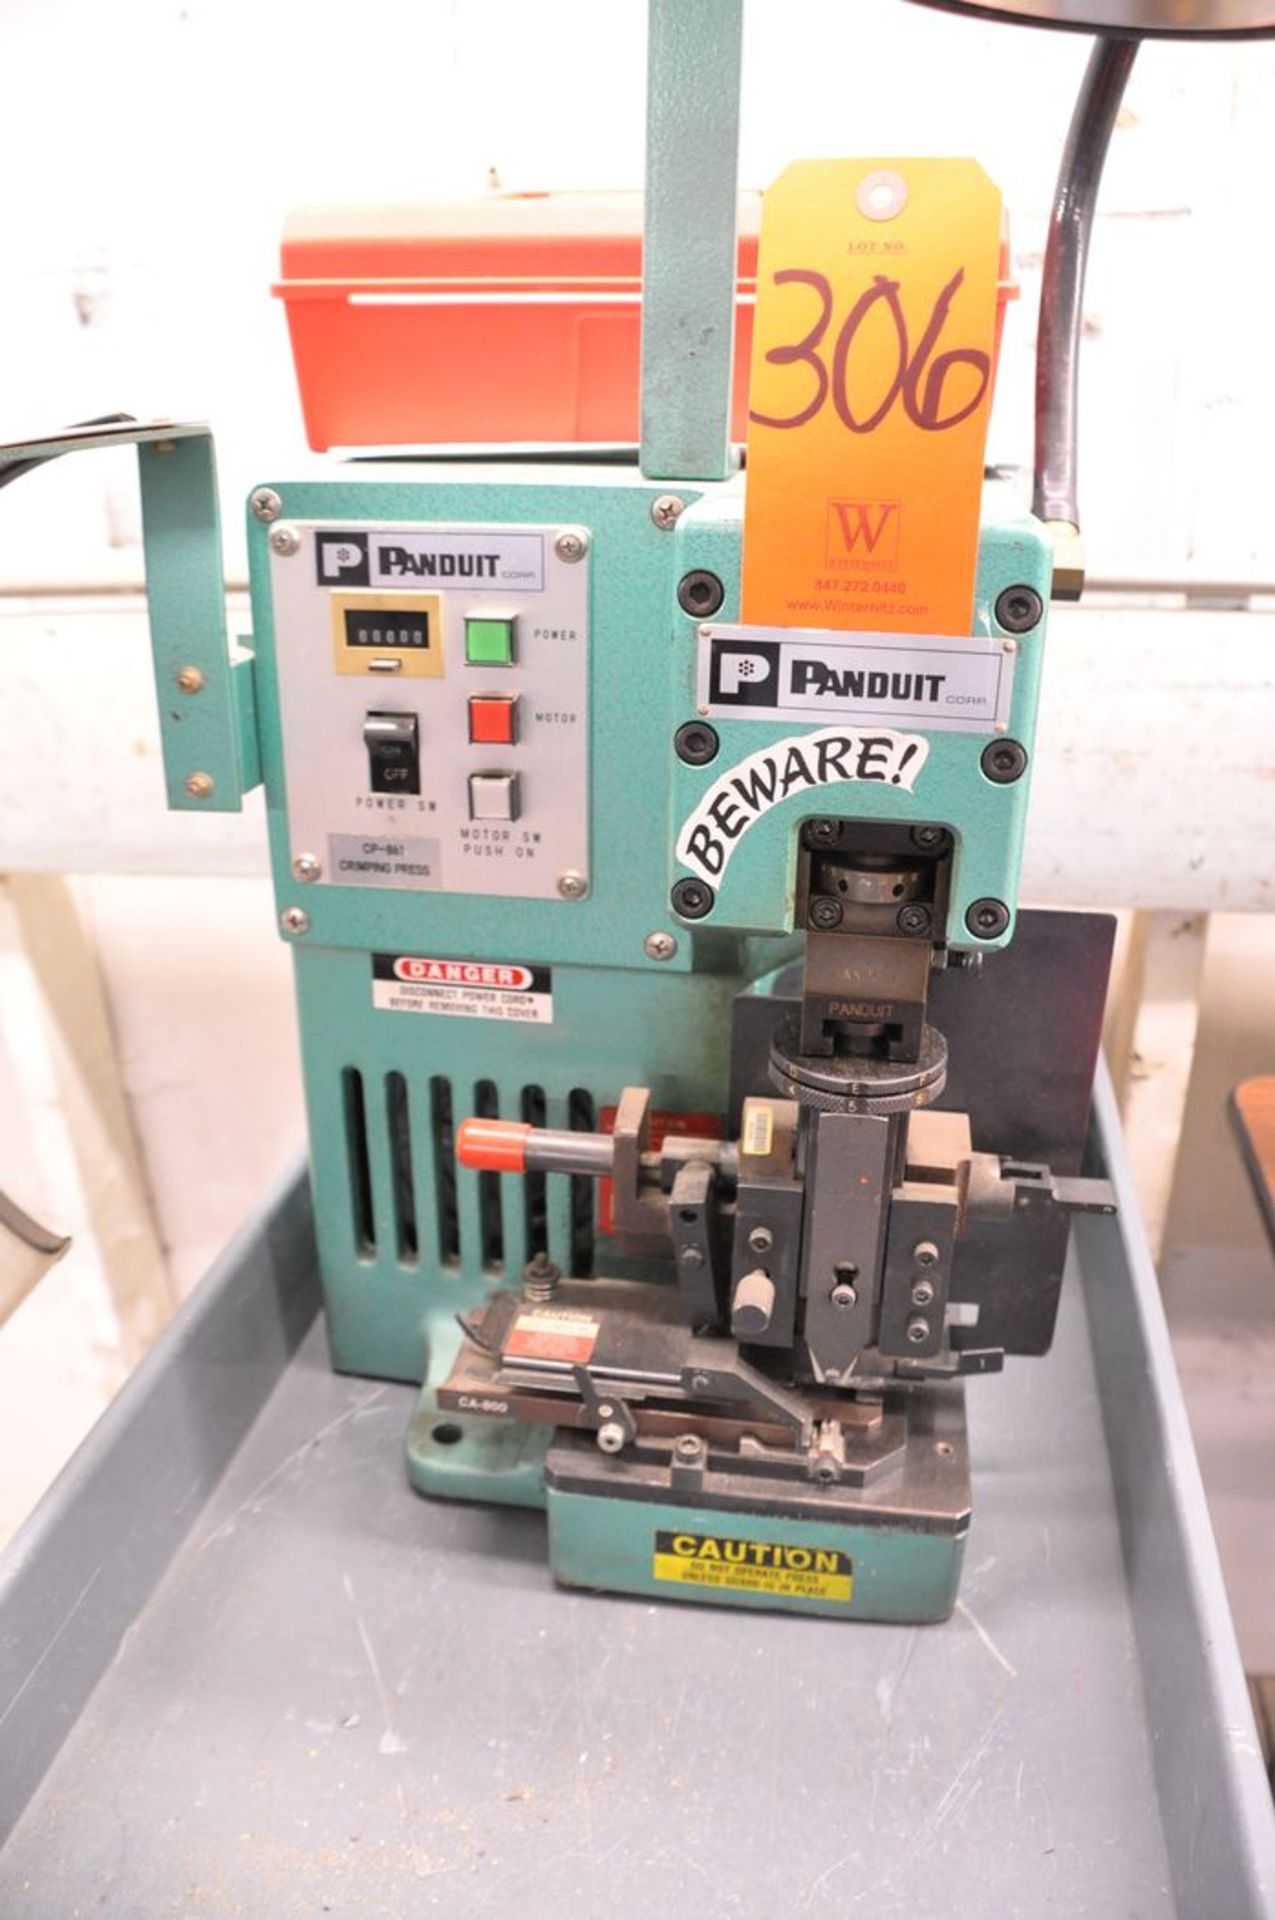 Panduit Model CP-861 Crimper Press, S/N: 568 (2005); with Die Inserts - Image 2 of 3